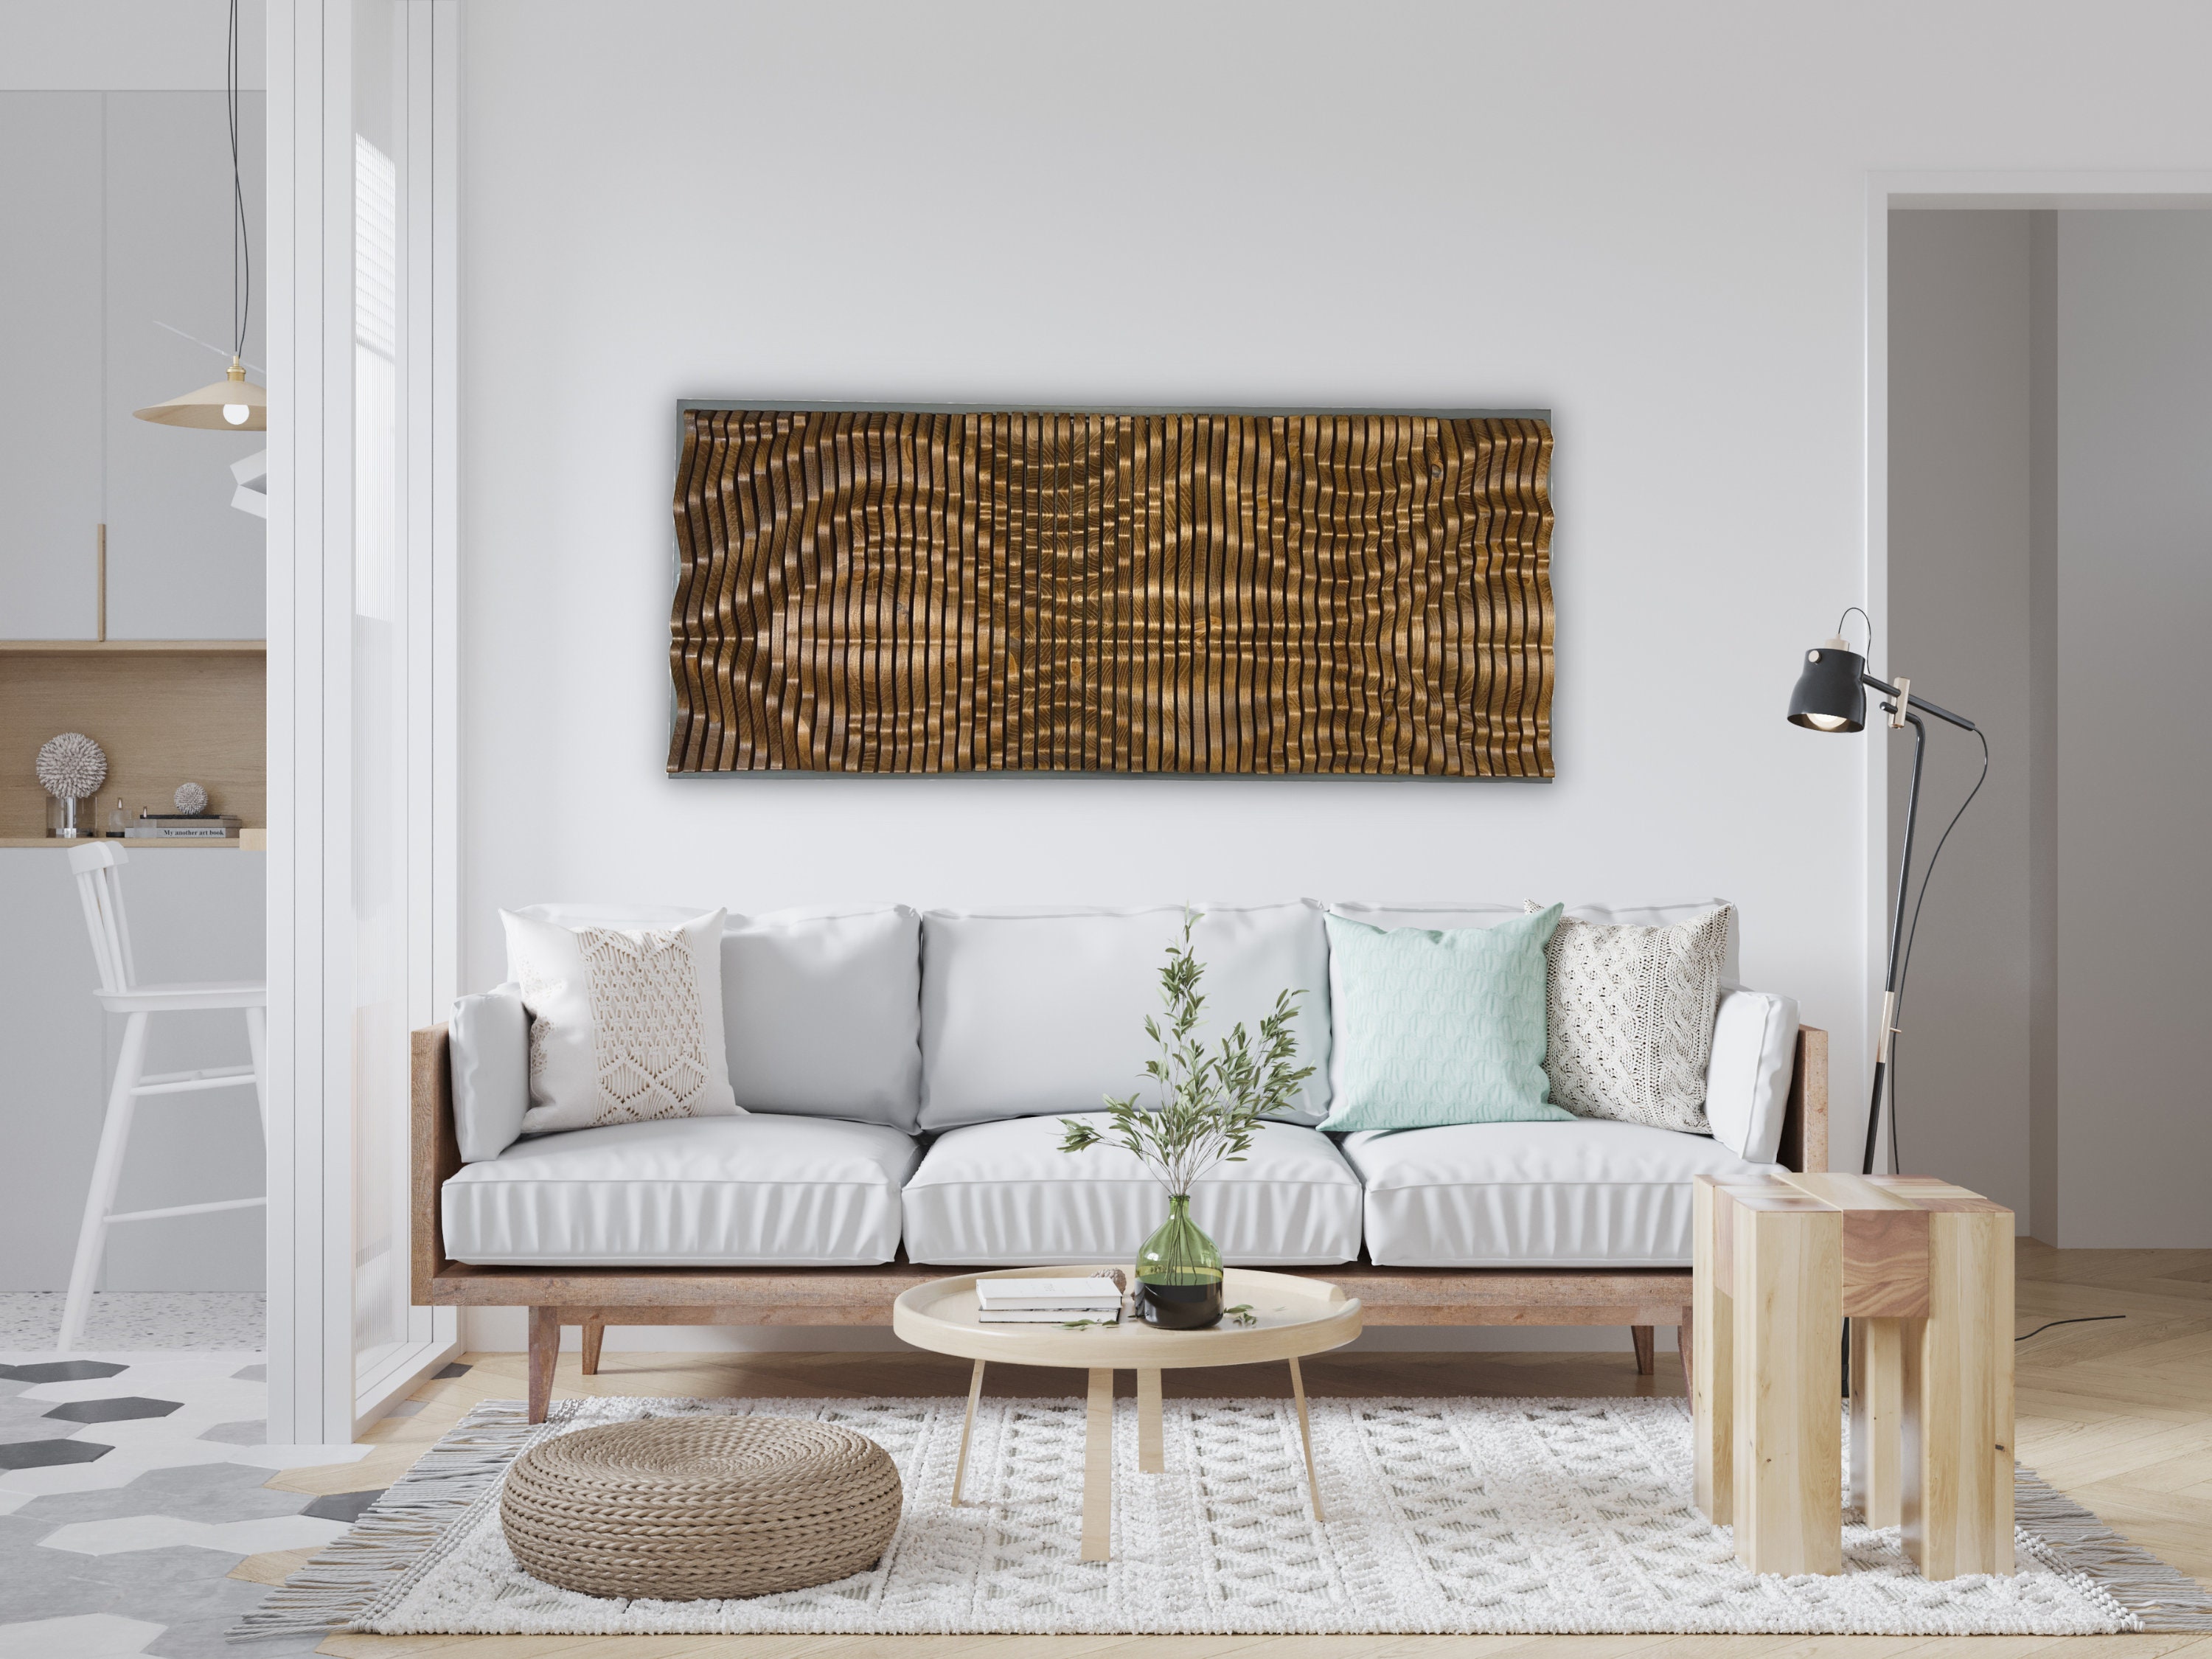 Unique Wall Art for Living Room → Enjoy The Wood